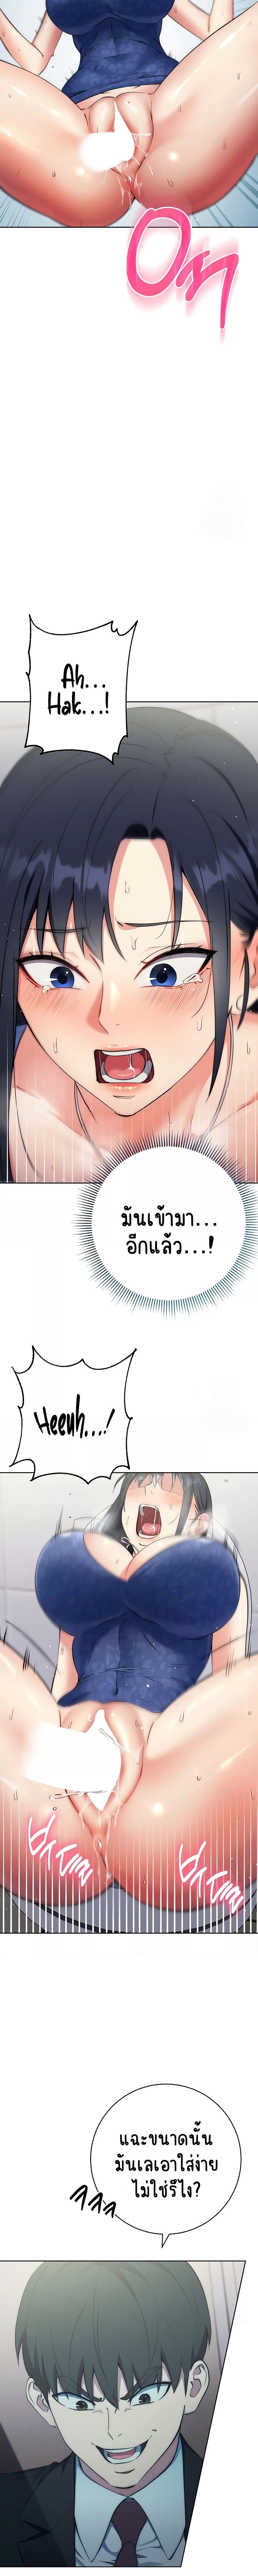 Outsider: The Invisible Man ตอนที่ 6 ภาพ 2